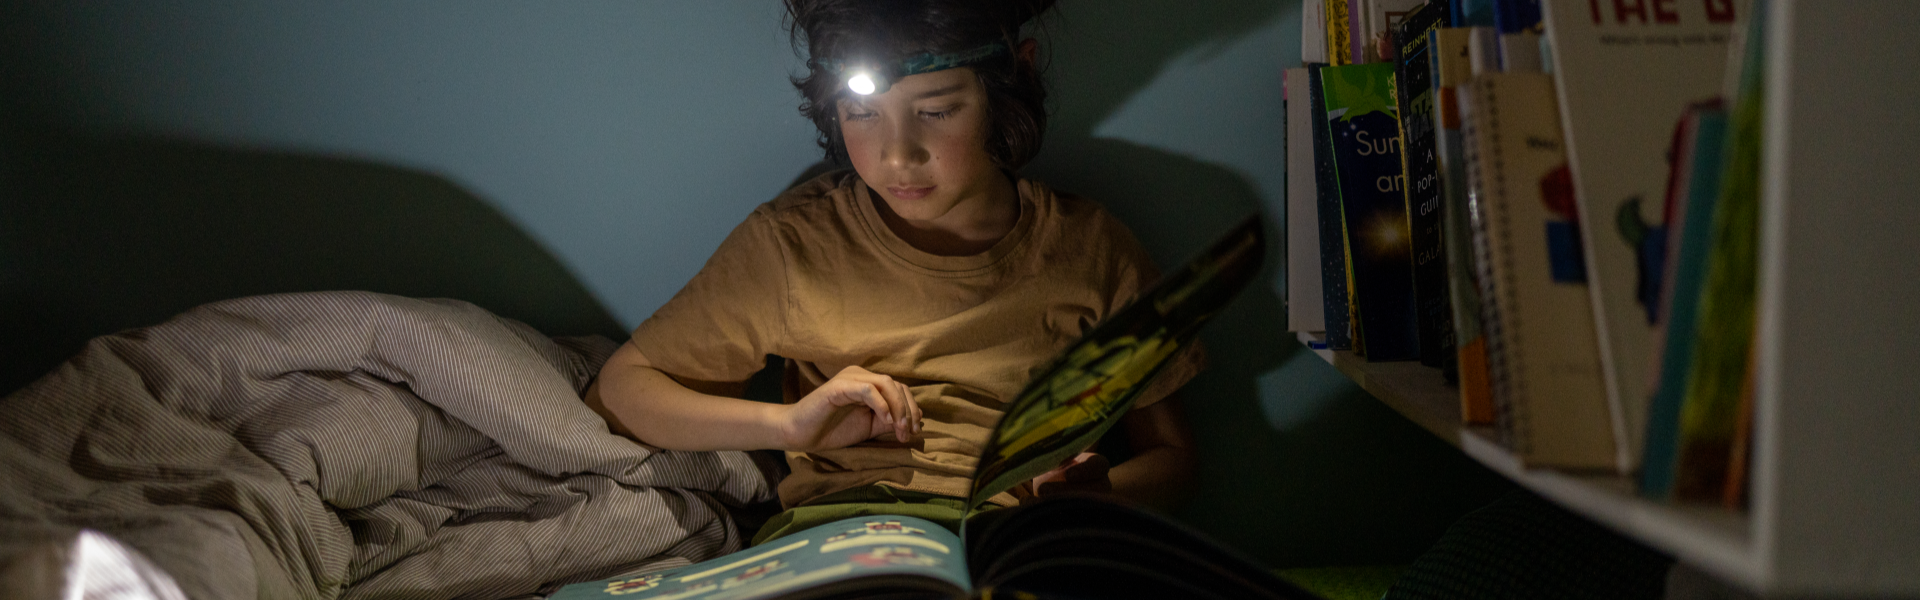 Boy is reading in the dark with a headlamp